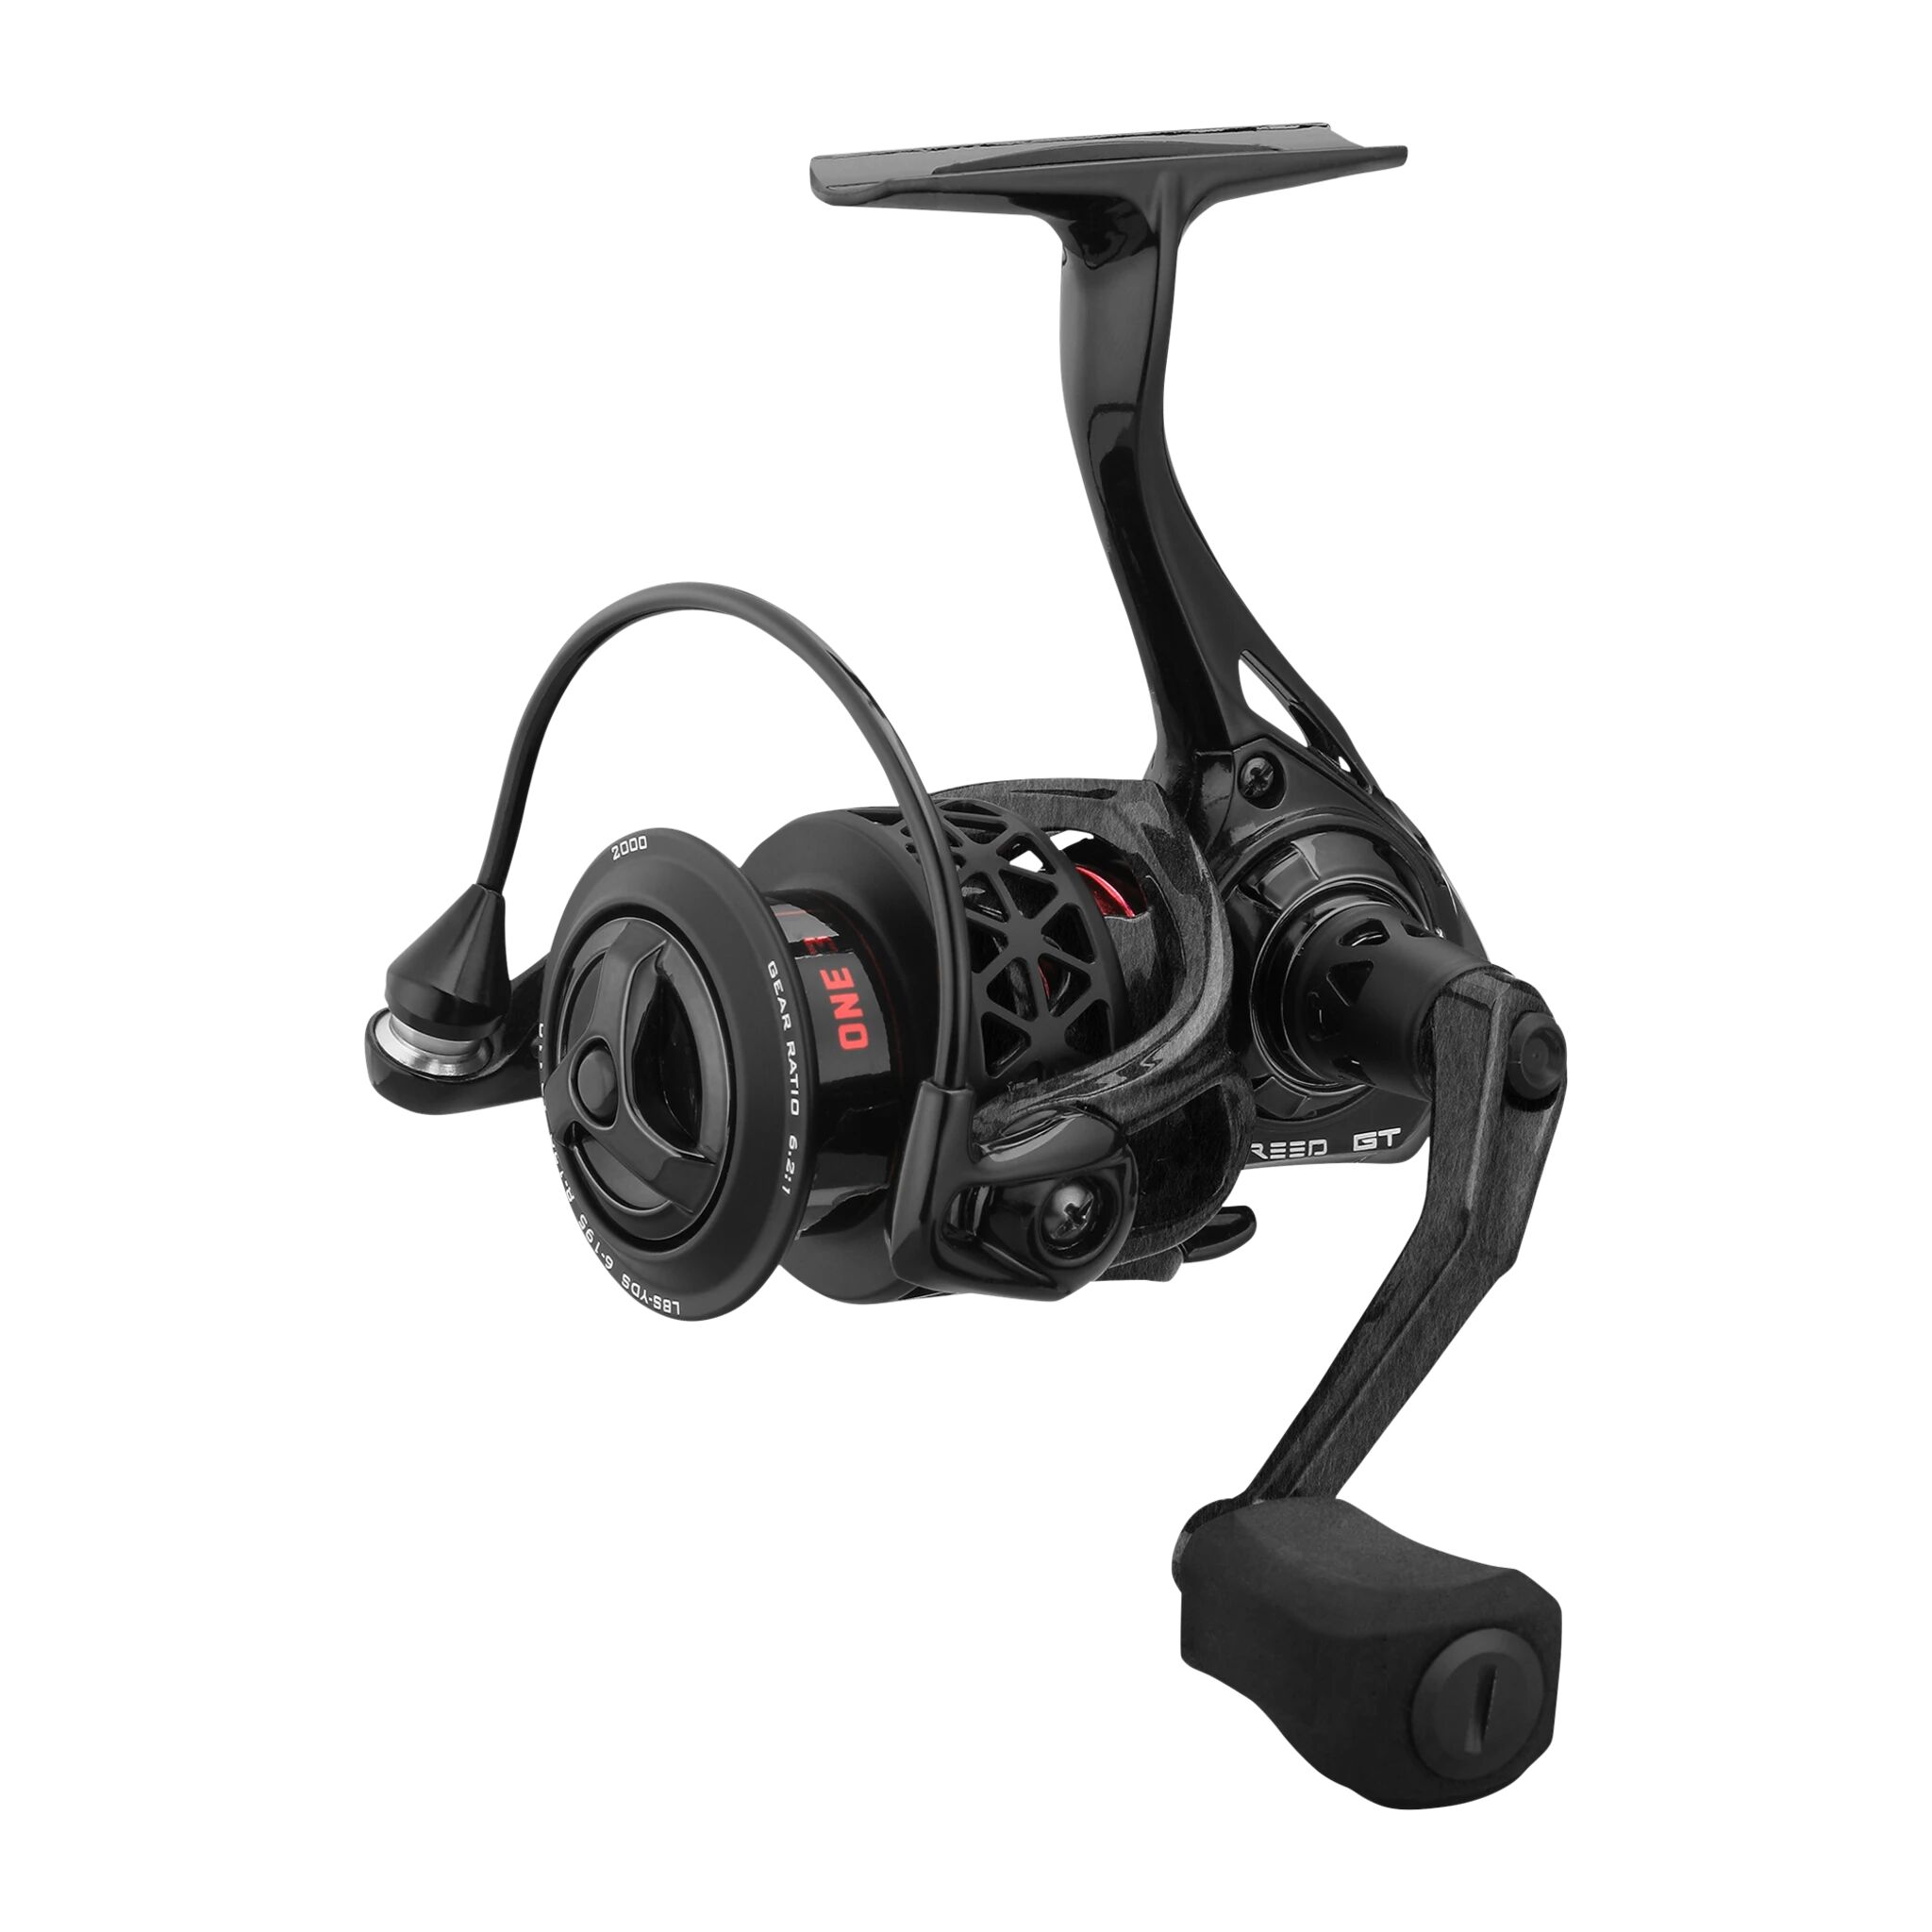 13 Fishing Creed Gt Spinning 6.2:1 4000, snelle 4000 STD